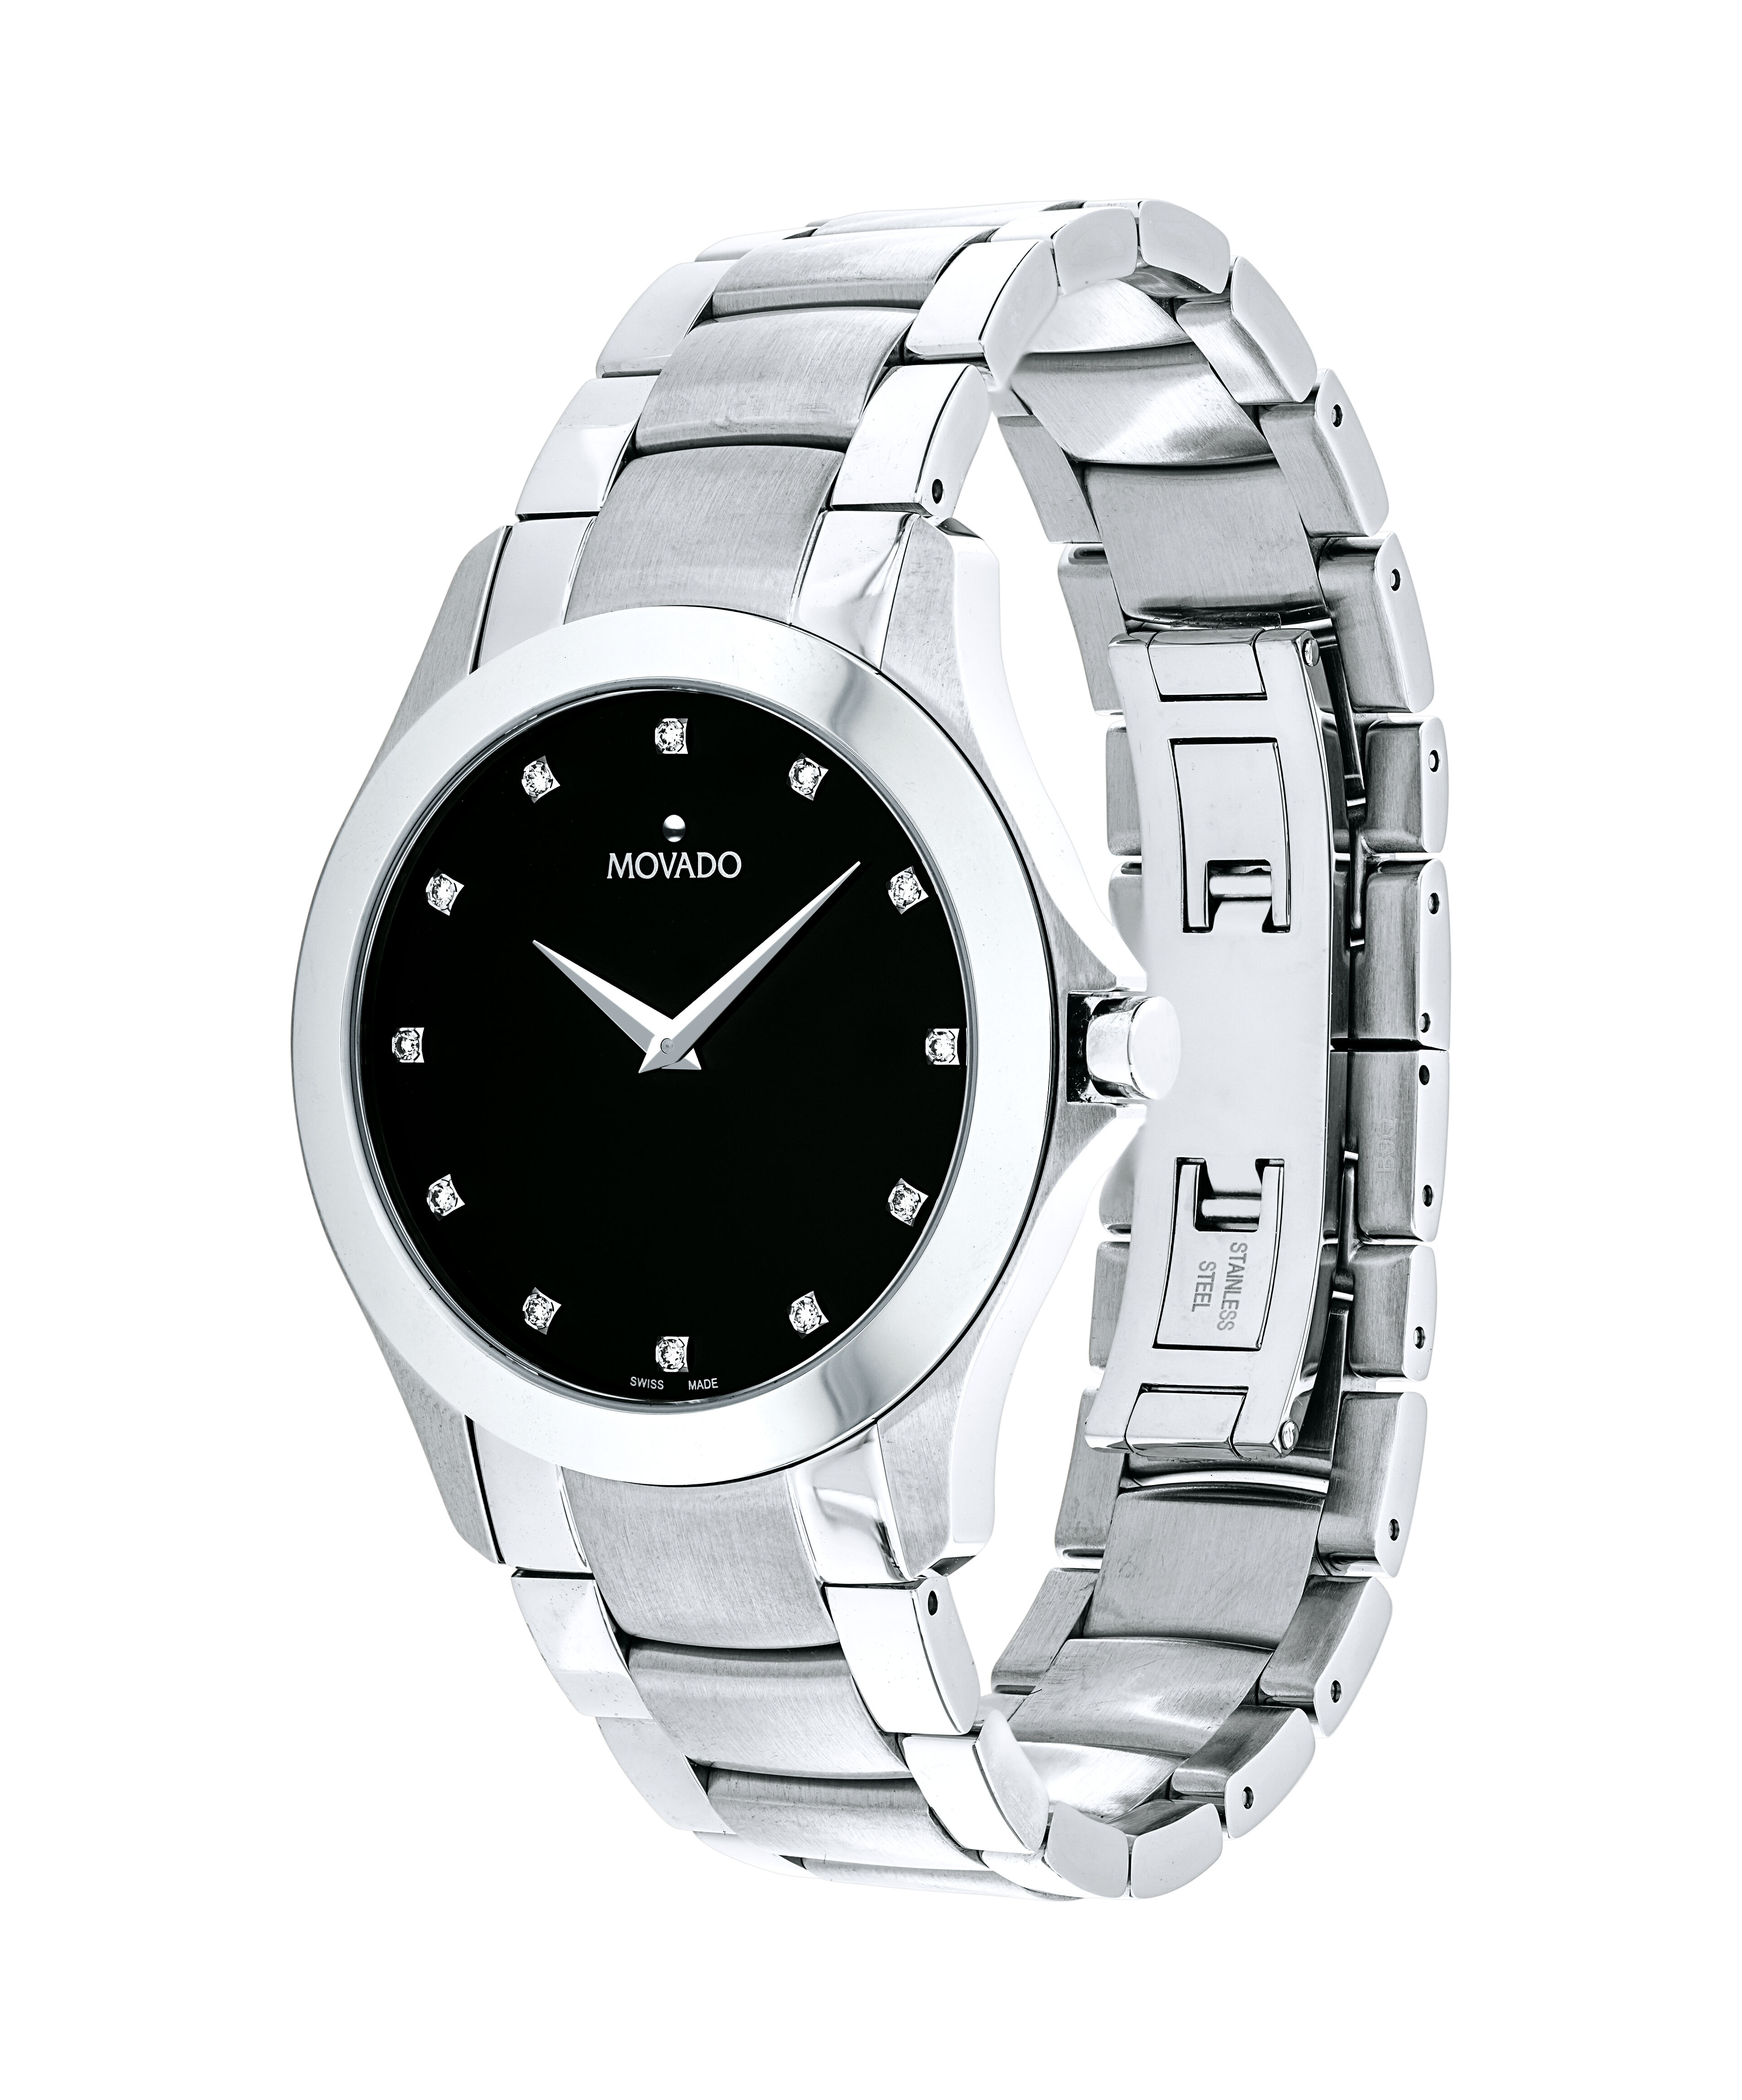 Movado Museum Classic Dial Black 25mm Steel/Gold / Ref. 85-90-821Movado Museum Classic Gold Black Dial Ladies Watch